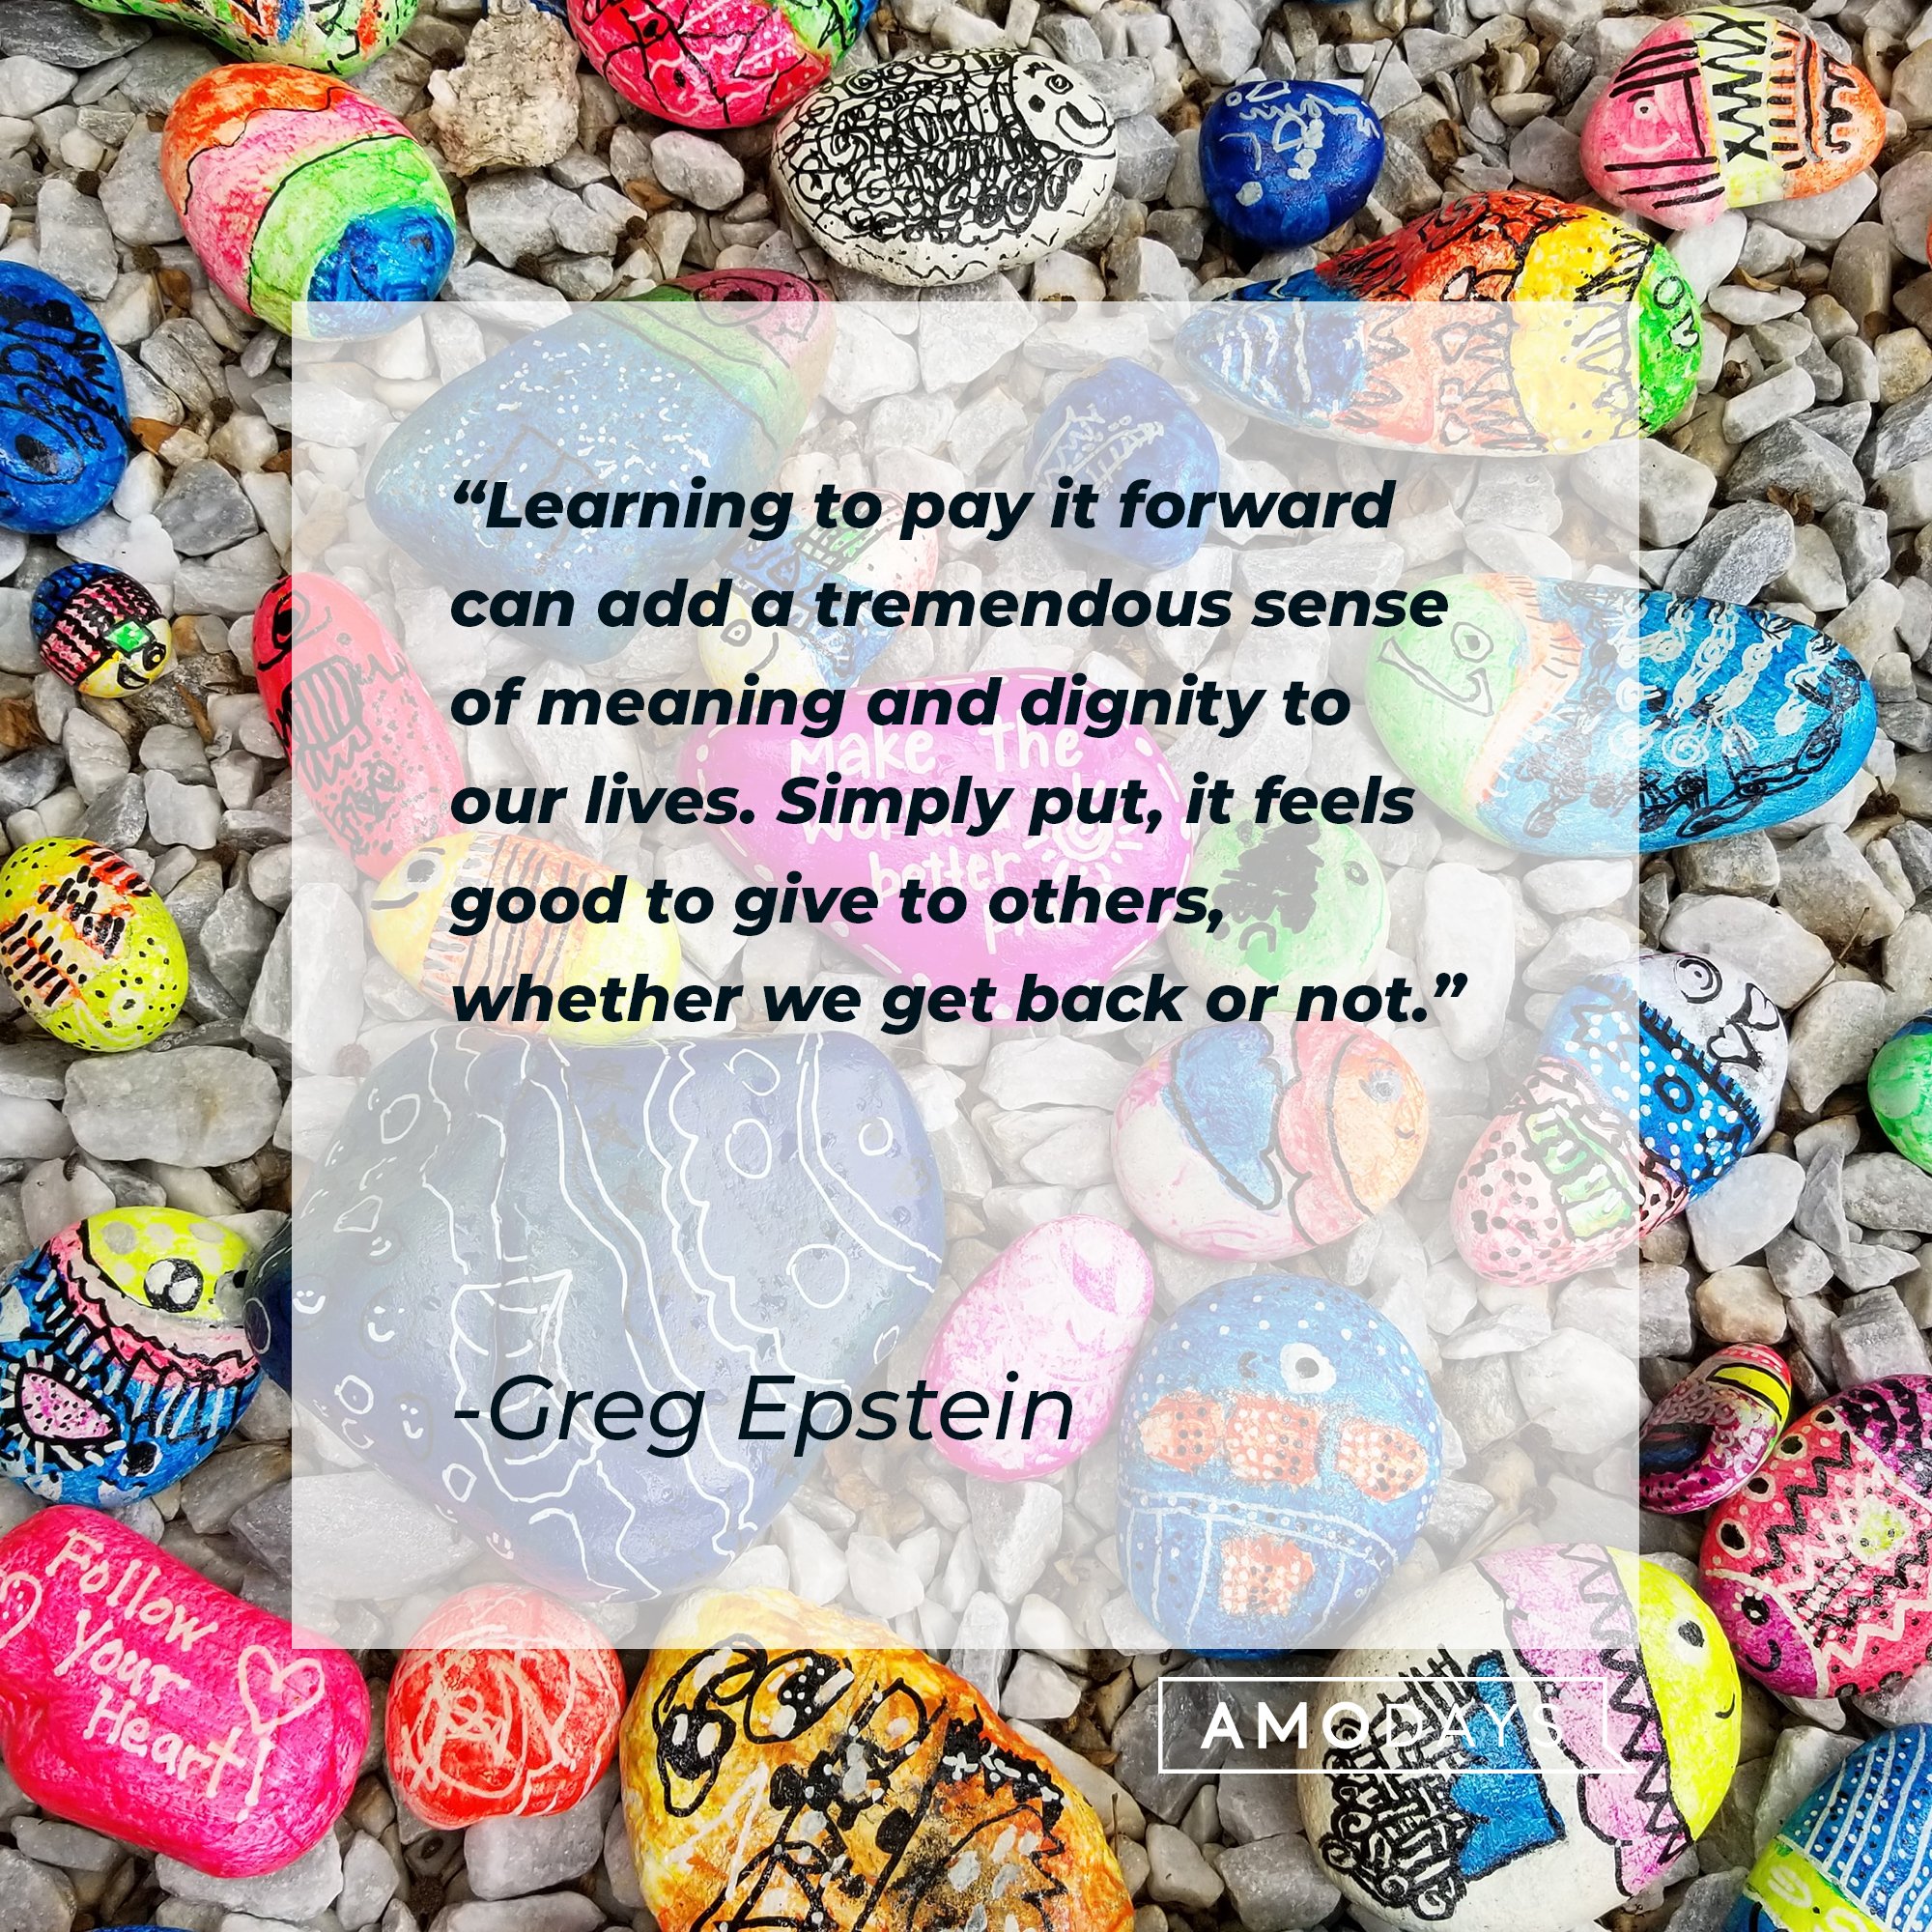 Greg Epstein’s quote: "Learning to pay it forward can add a tremendous sense of meaning and dignity to our lives. Simply put, it feels good to give to others, whether we get back or not." | Image: AmoDays